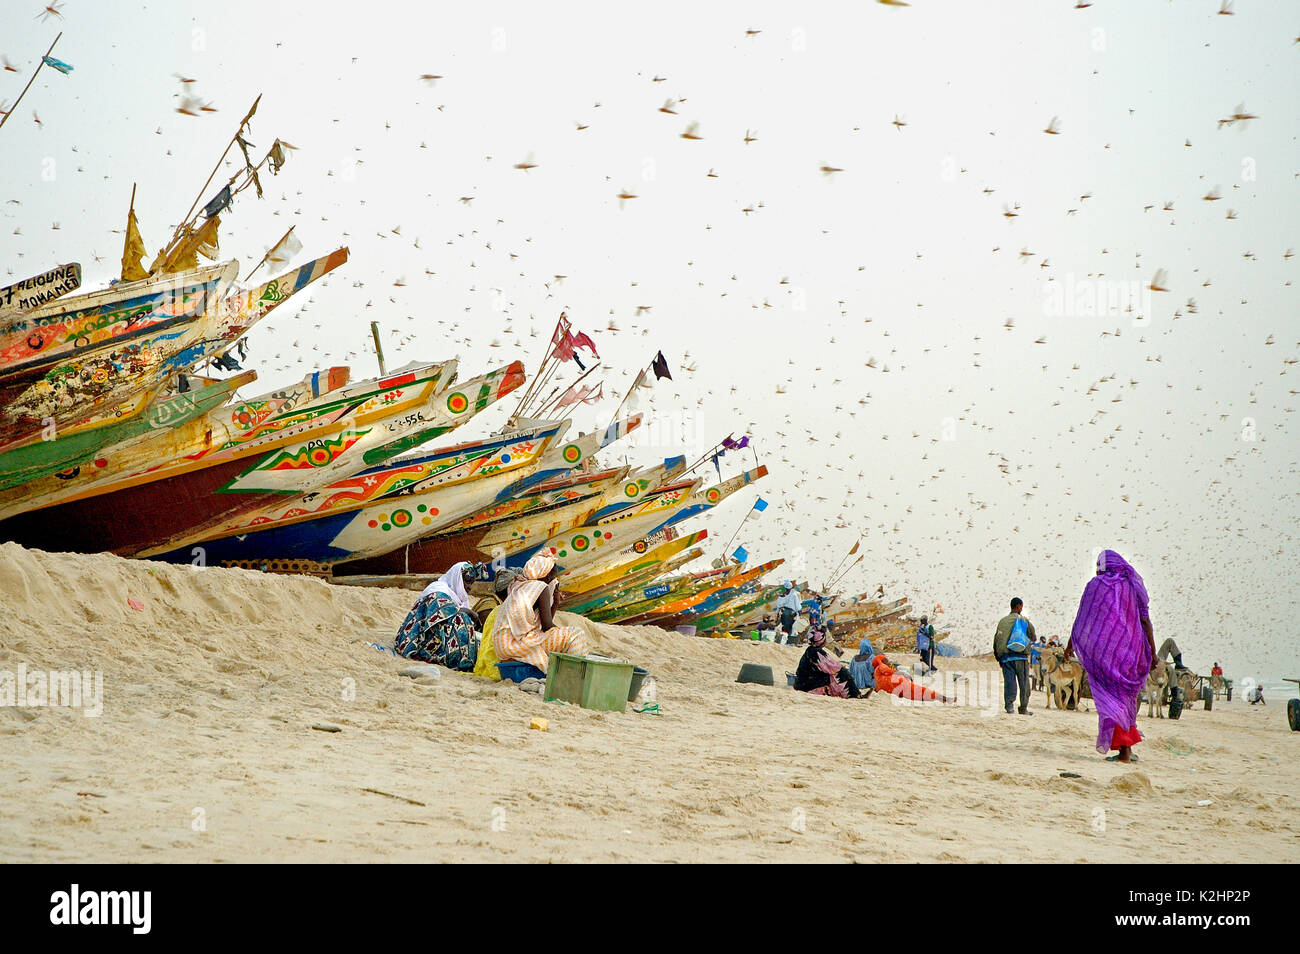 A woman protects herself from a swarm of locust plague on the beach. Nouakchott, Mauritania Stock Photo